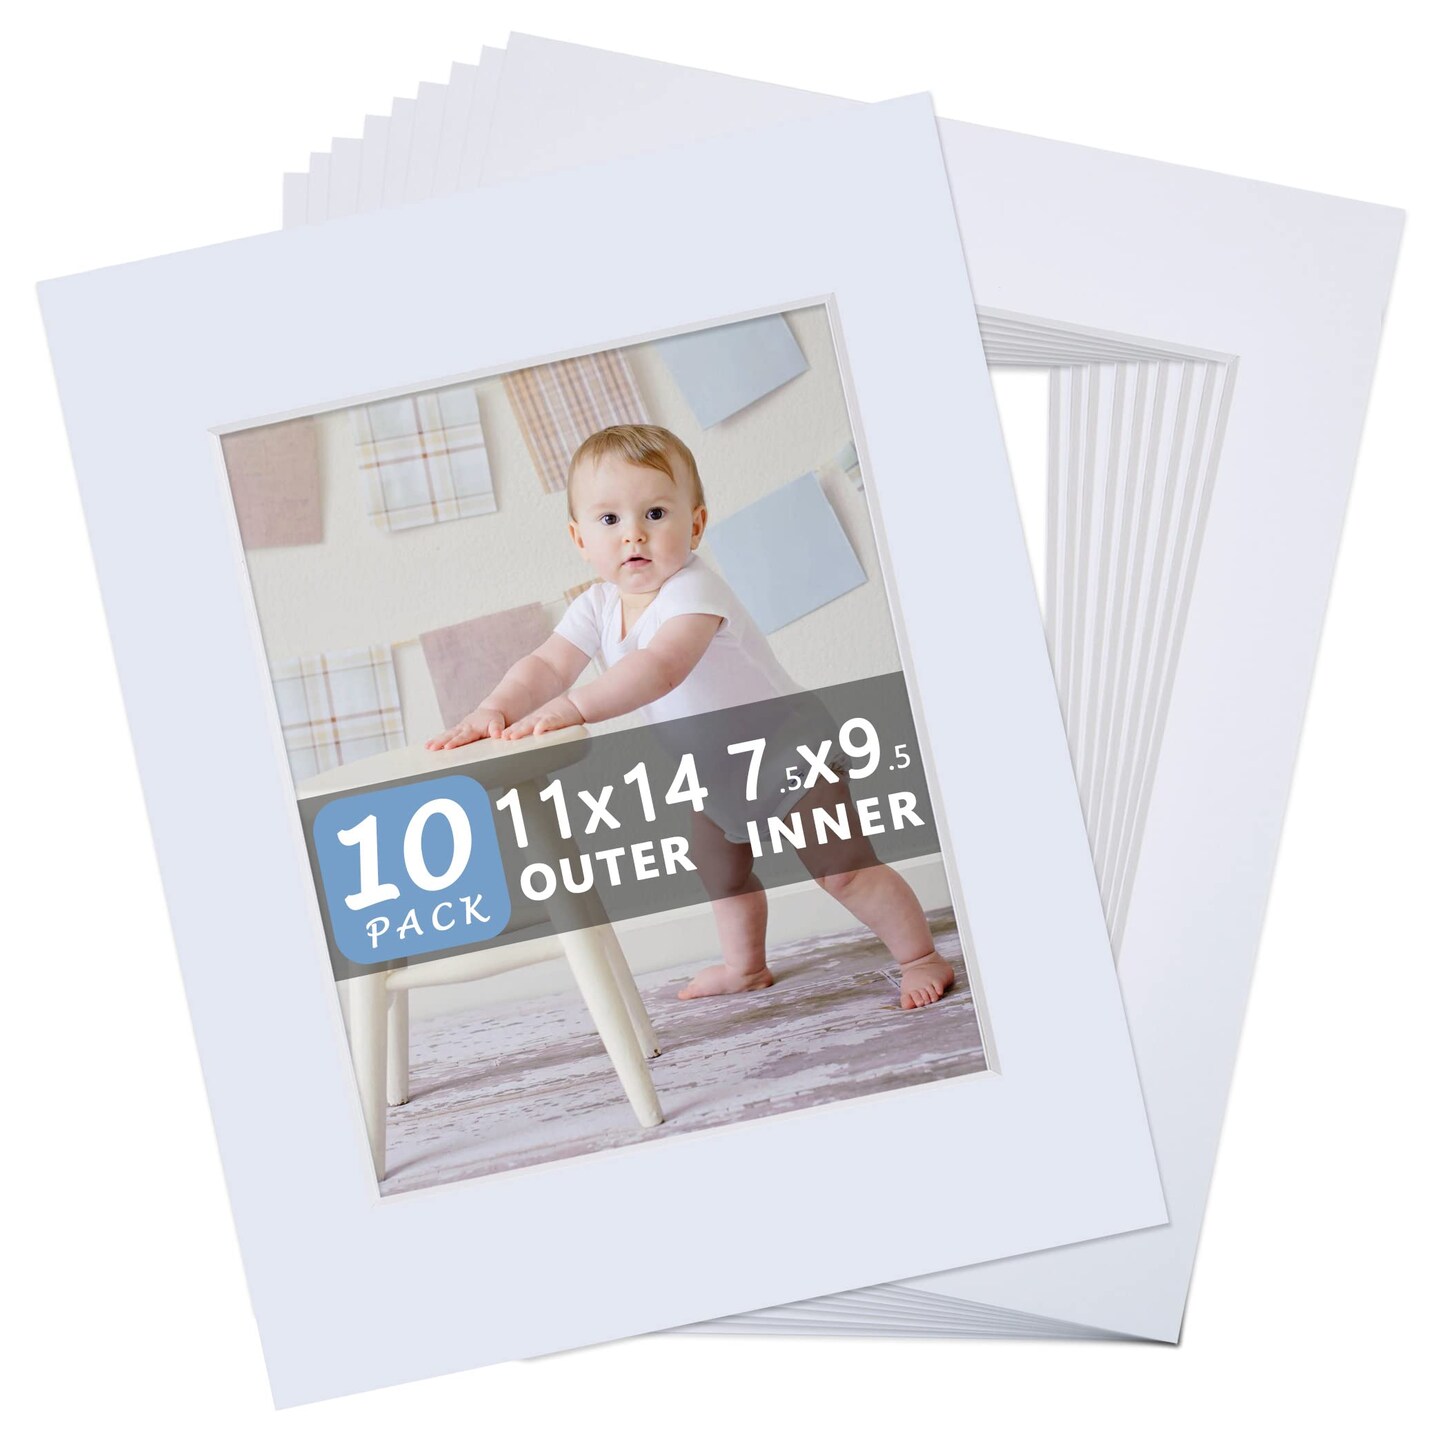 Somime 10 Pack Pre-Cut 11 x 14 White Picture Mats for 8x10 Photos - White Core Bevel Cut Frame Matte, Acid Free, Ideal for Frames/Artwork/Prints